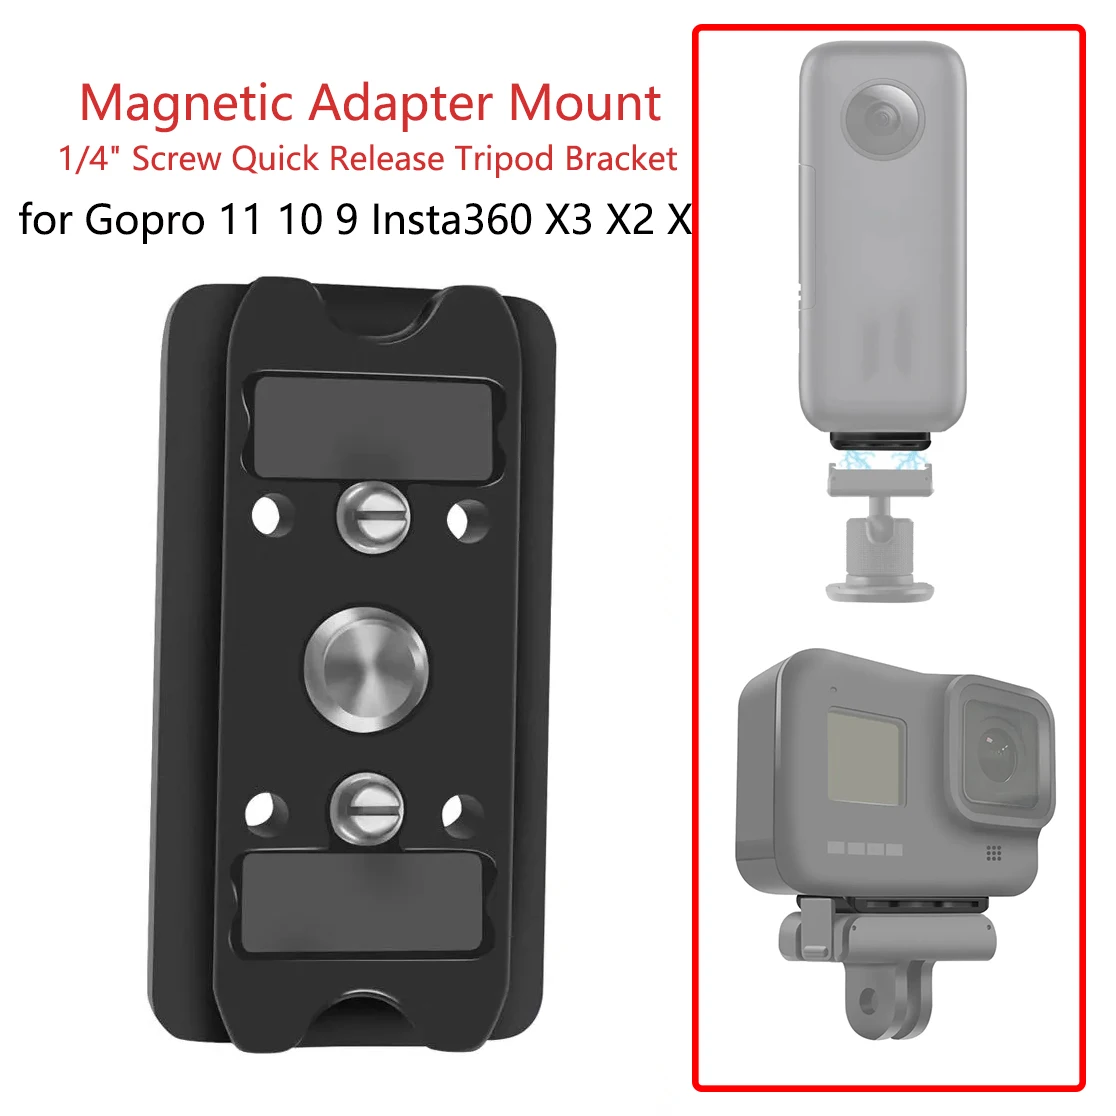 Magnetic Adapter Mount 1/4 Screw Quick Release Tripod Bracket for